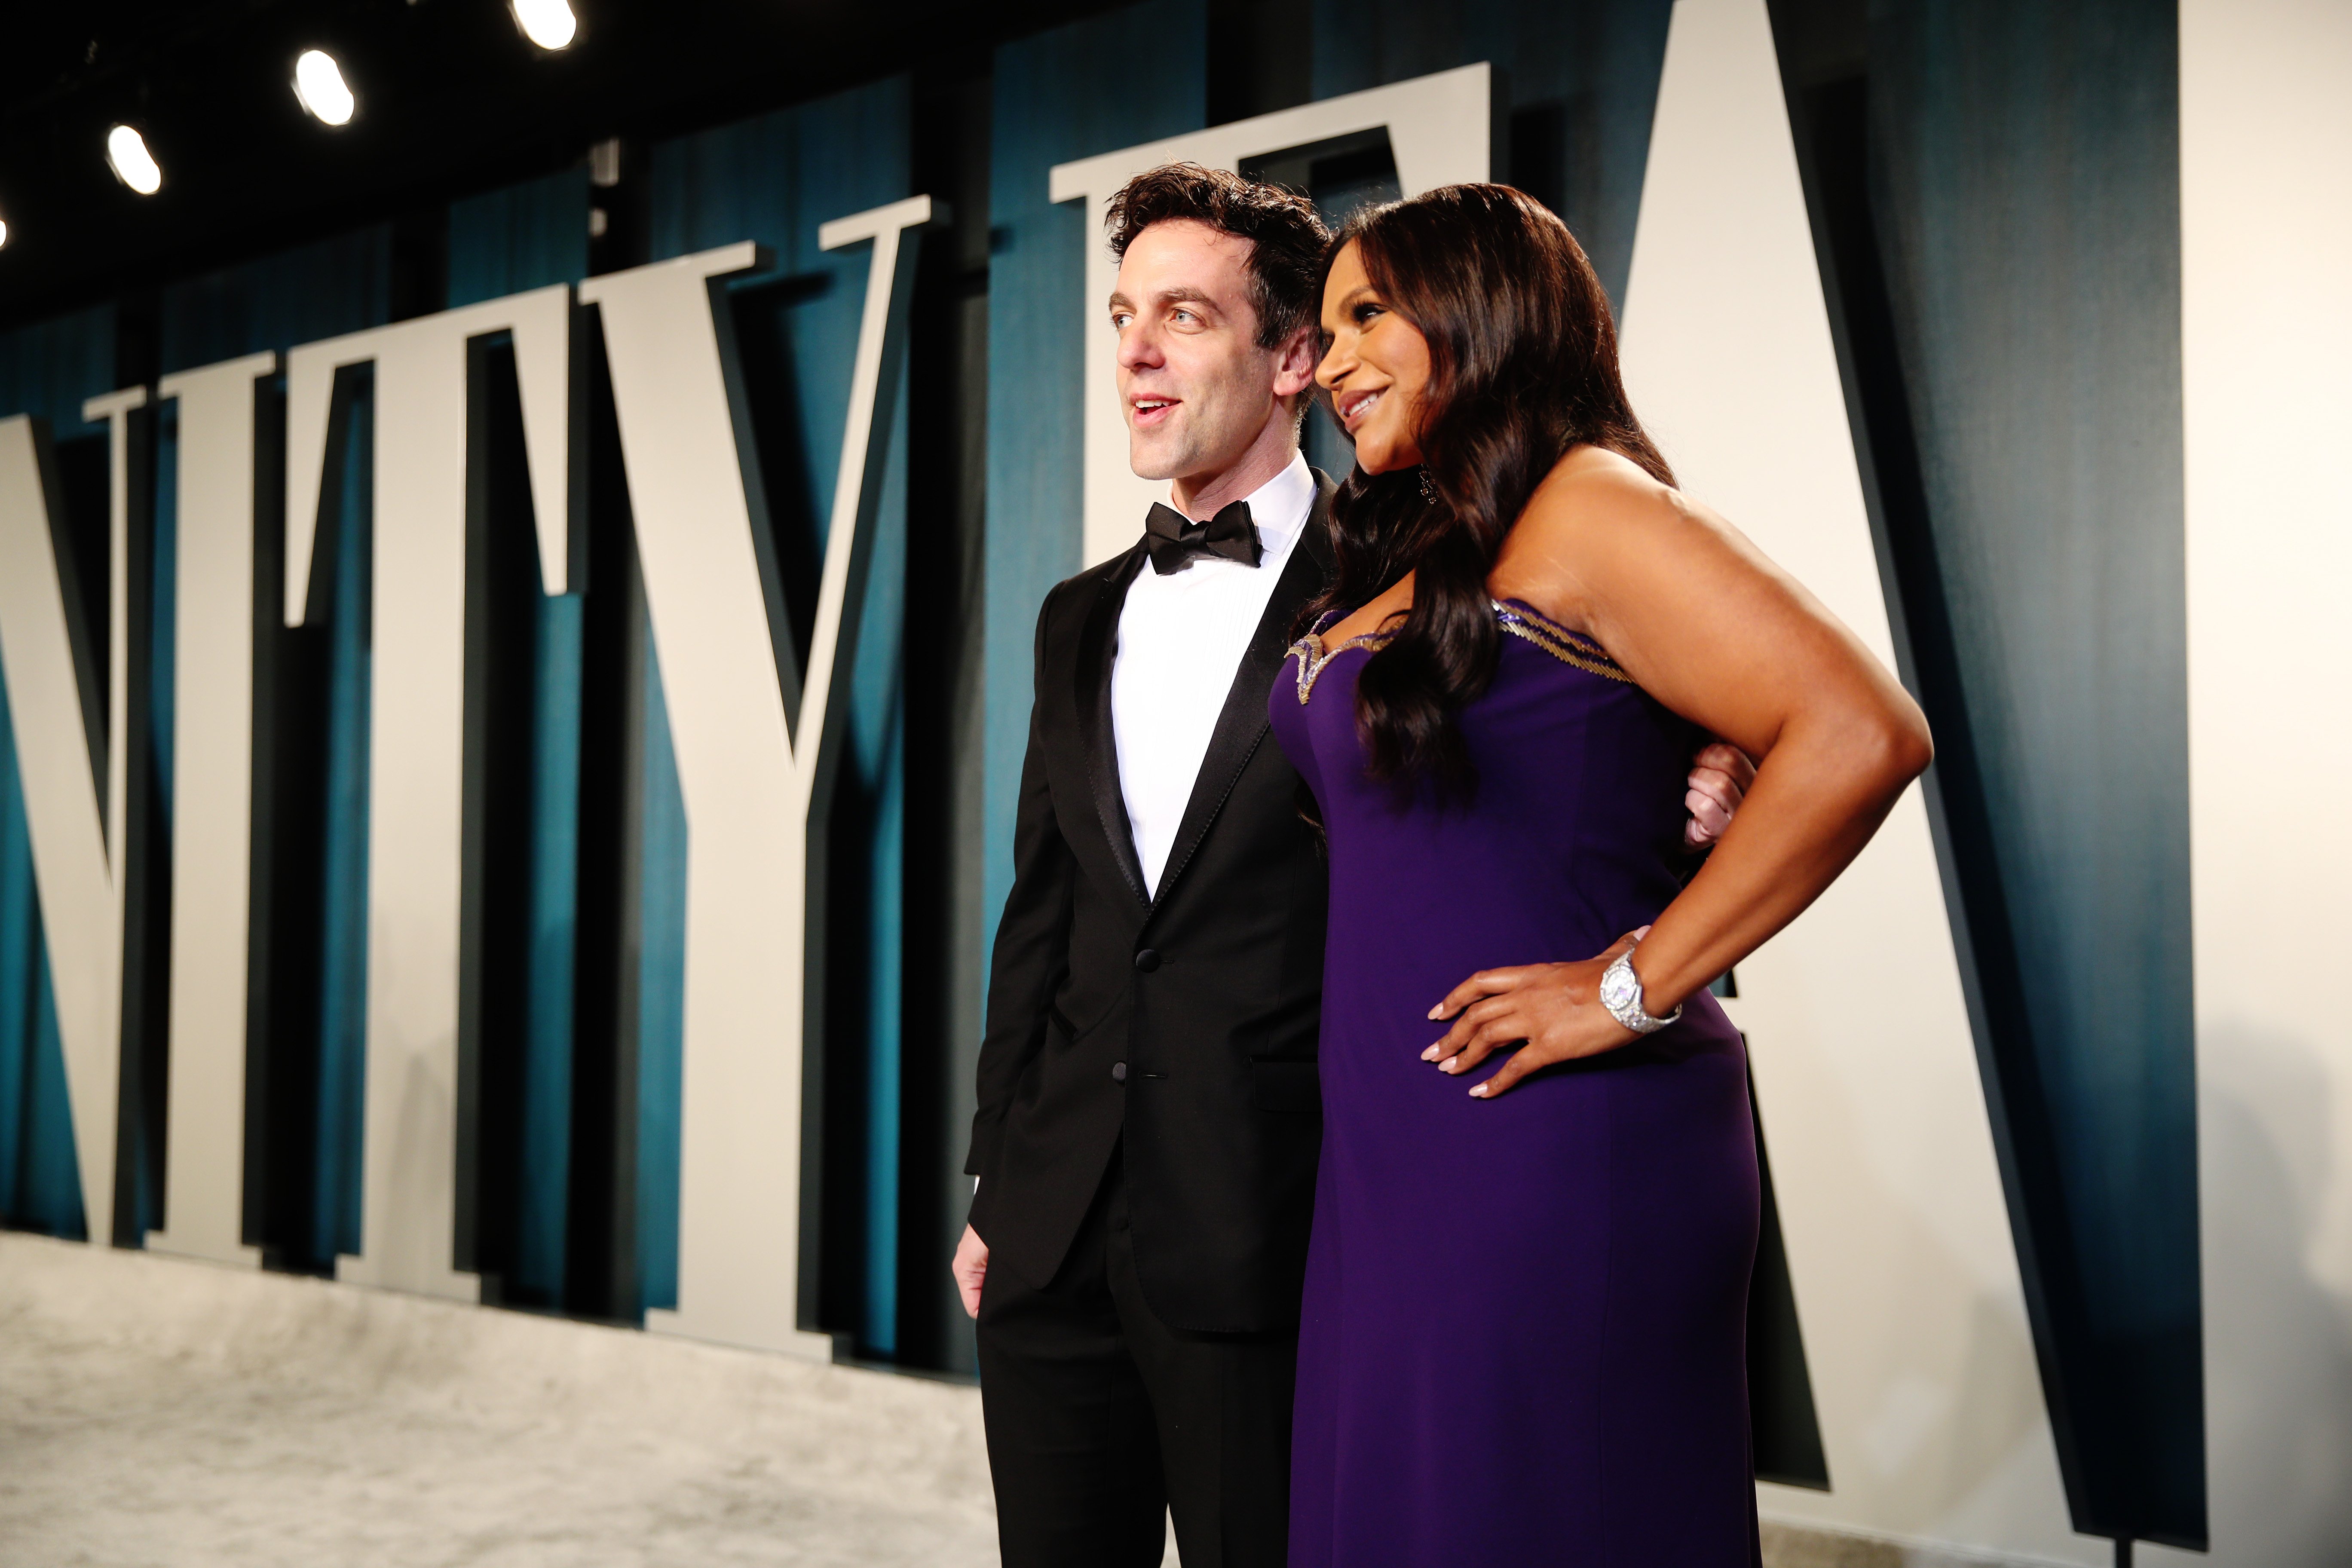 B.J. Novak and Mindy Kaling attend the 2020 Vanity Fair Oscar Party on February 9, 2020, in Beverly Hills, California. | Source: Getty Images